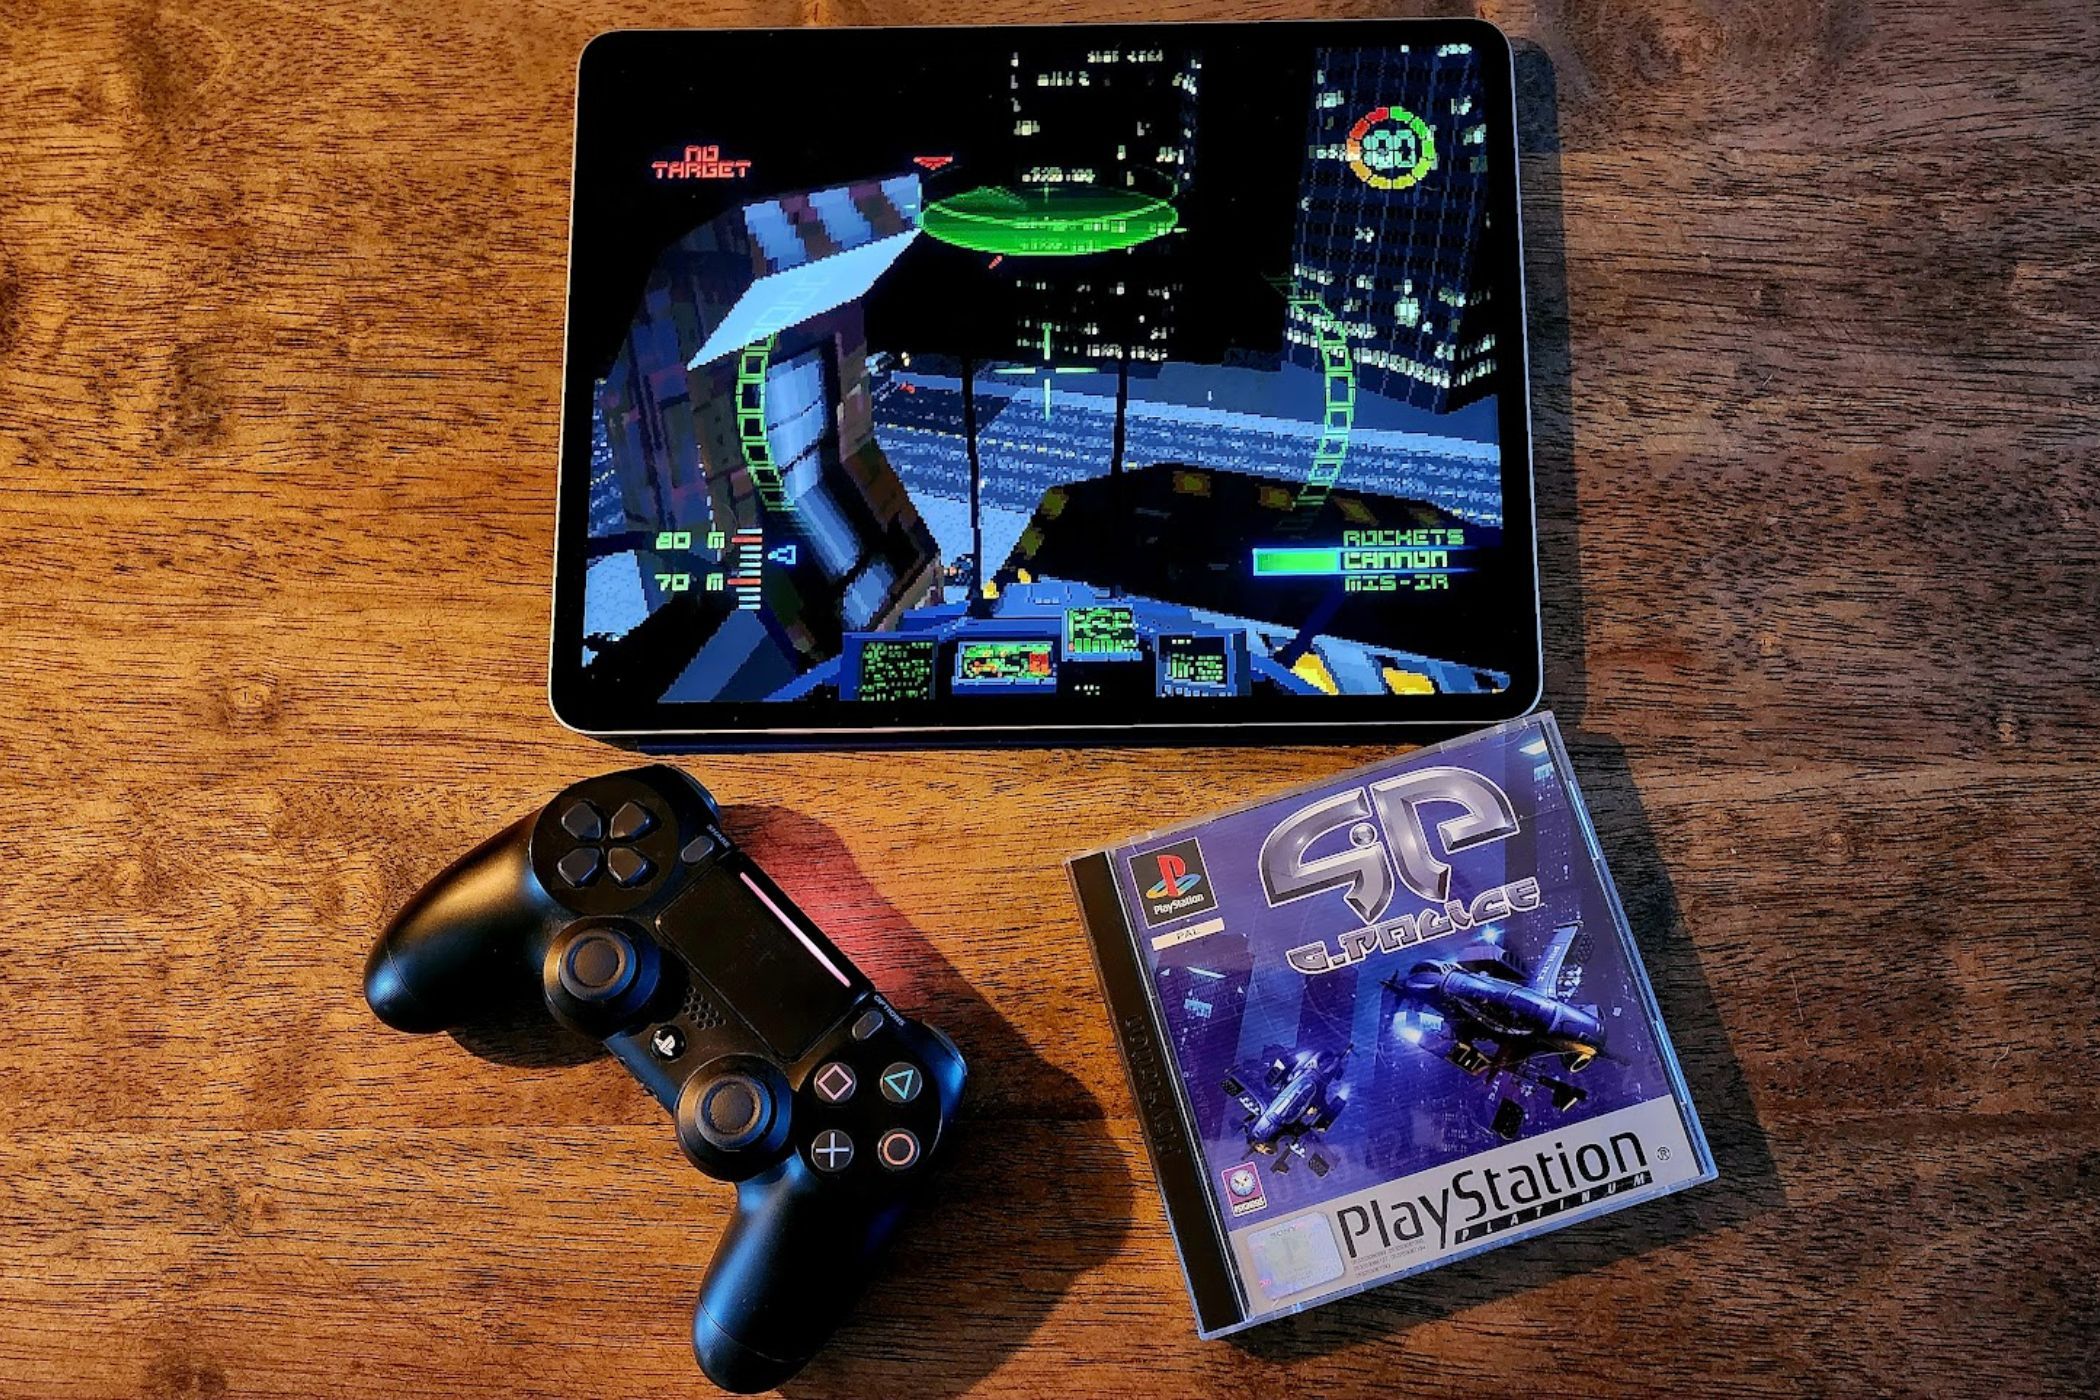 An iPad running G-Police next a  physical original copy of the game and a PS4 controller